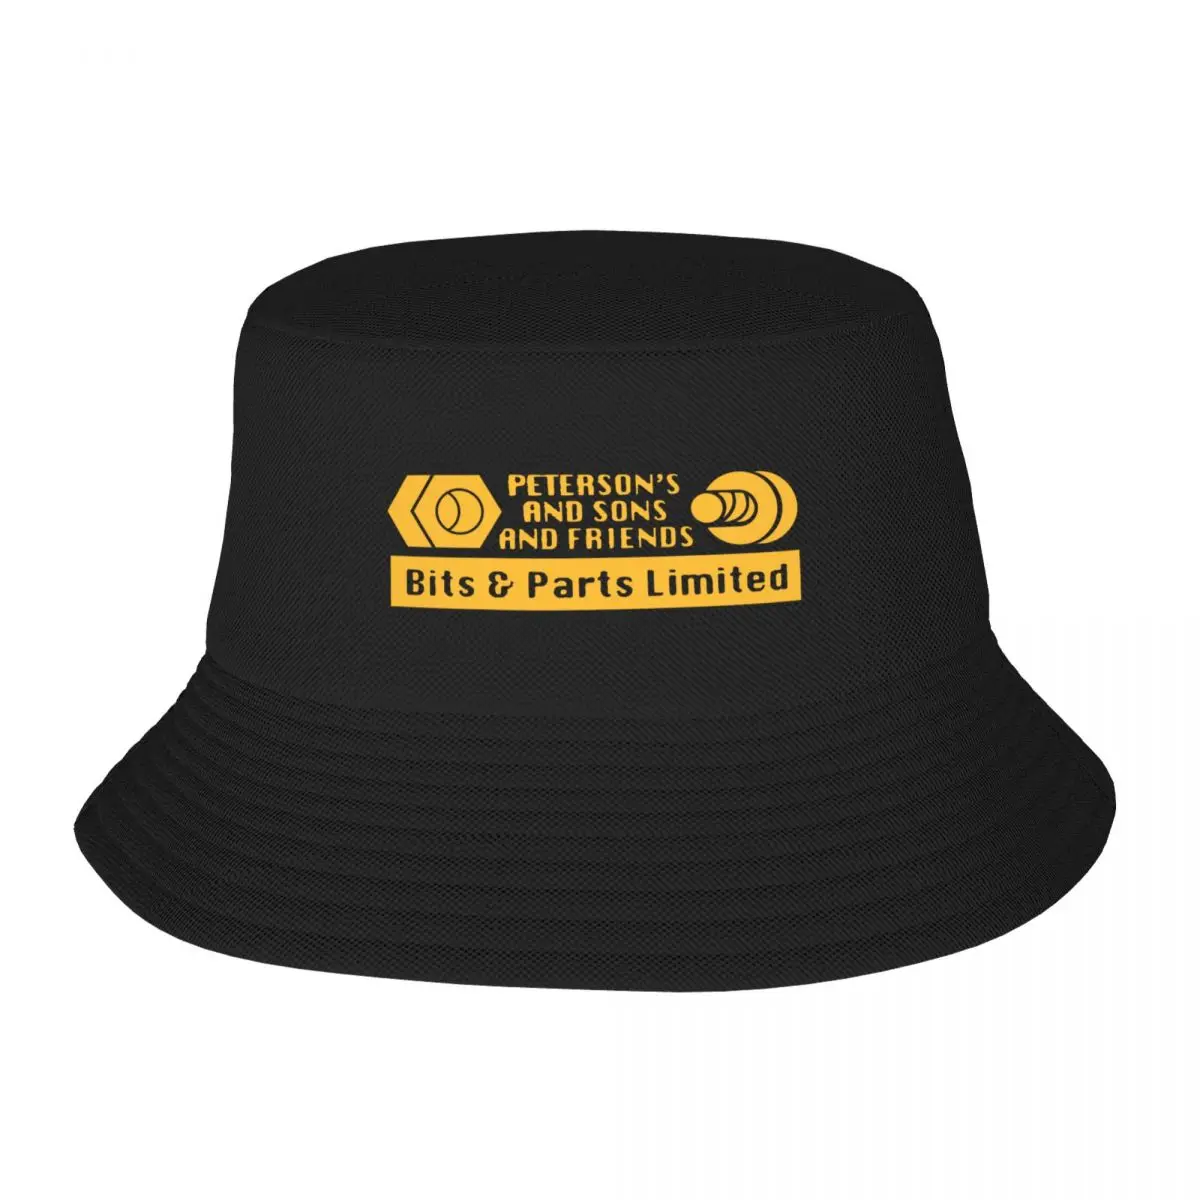 

New Peterson's and Sons and Friends Dhmis Bucket Hat Snapback Cap Luxury Cap Fashion Beach Woman Hats Men's